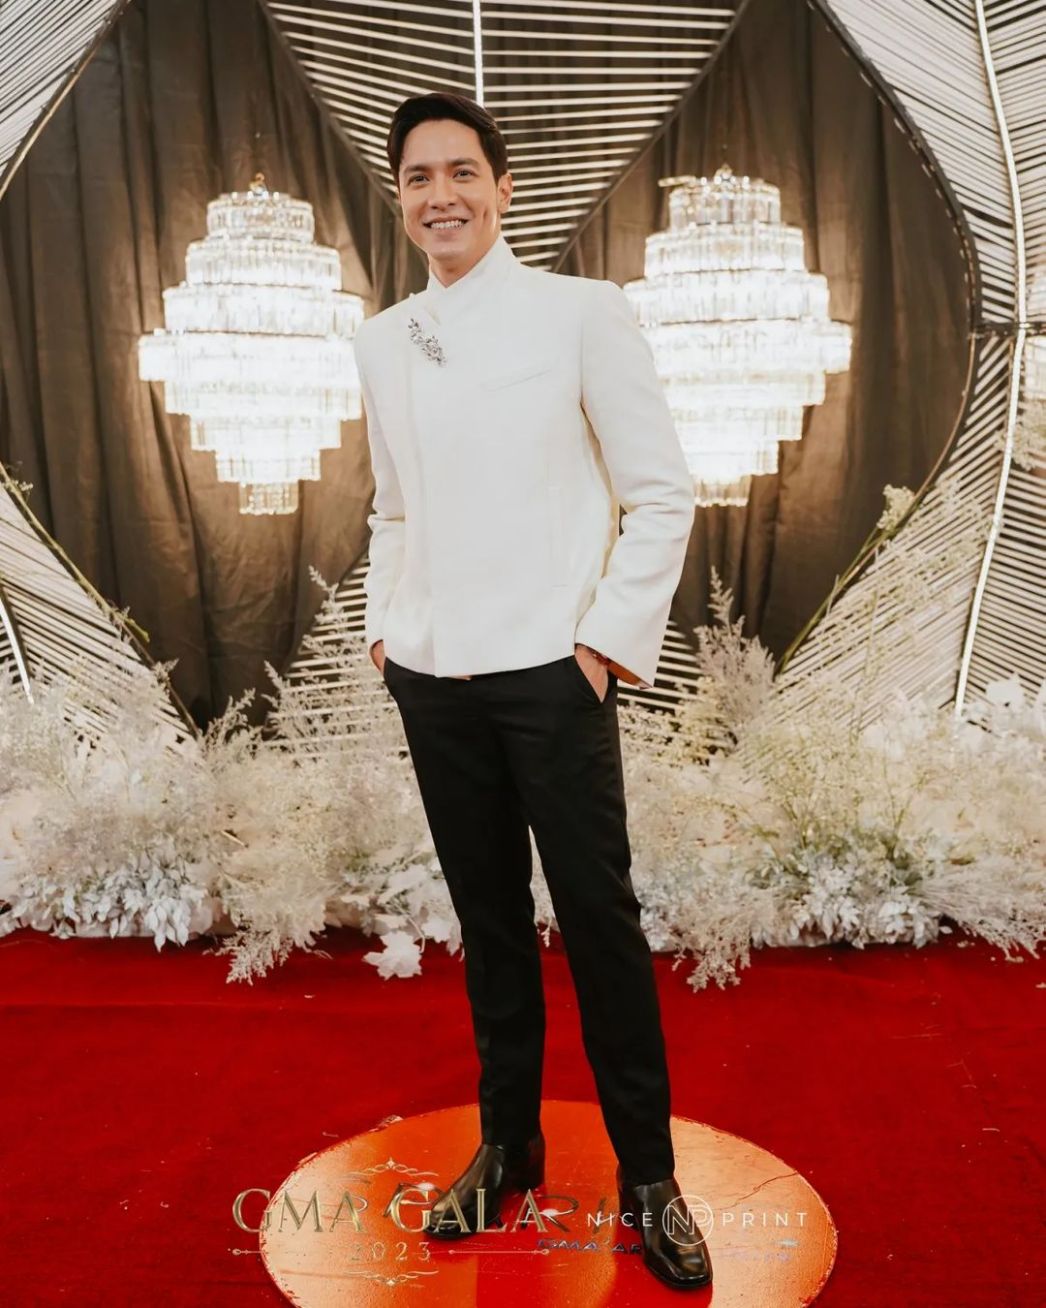 GMA Gala 2023: The Best Dressed Men From the Red Carpet